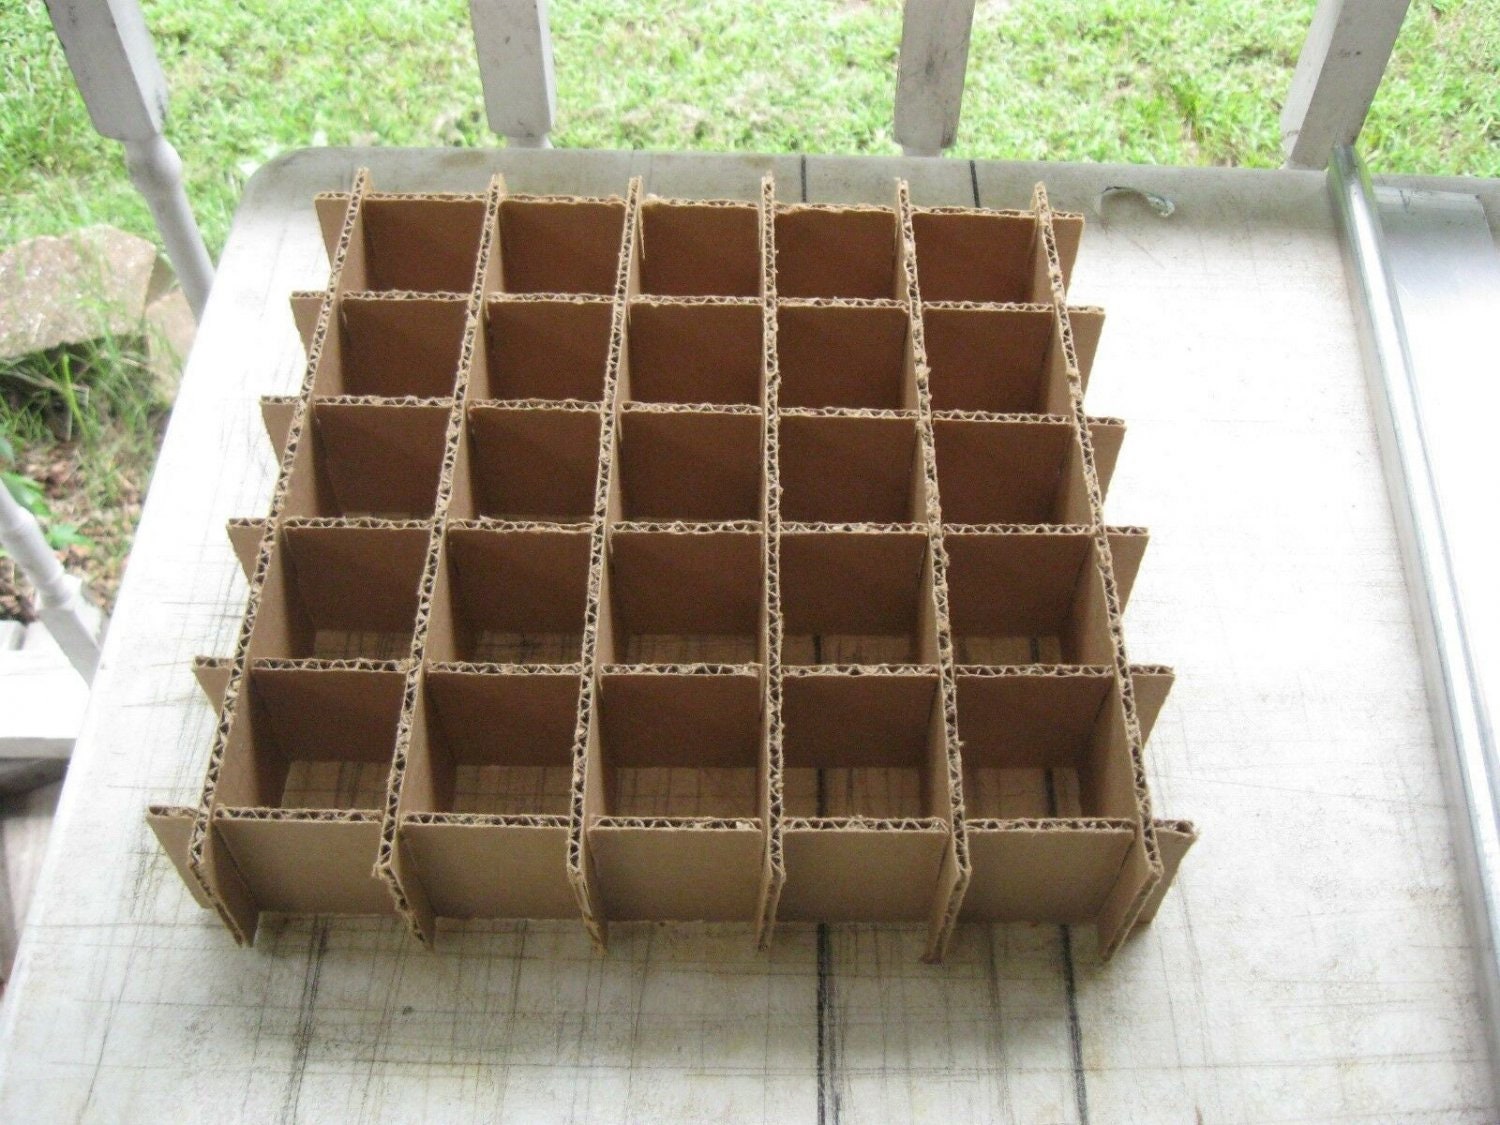 Cardboard Dividers 5 Sets 12 X 12 X 3 High 9 cell B 12-3-02